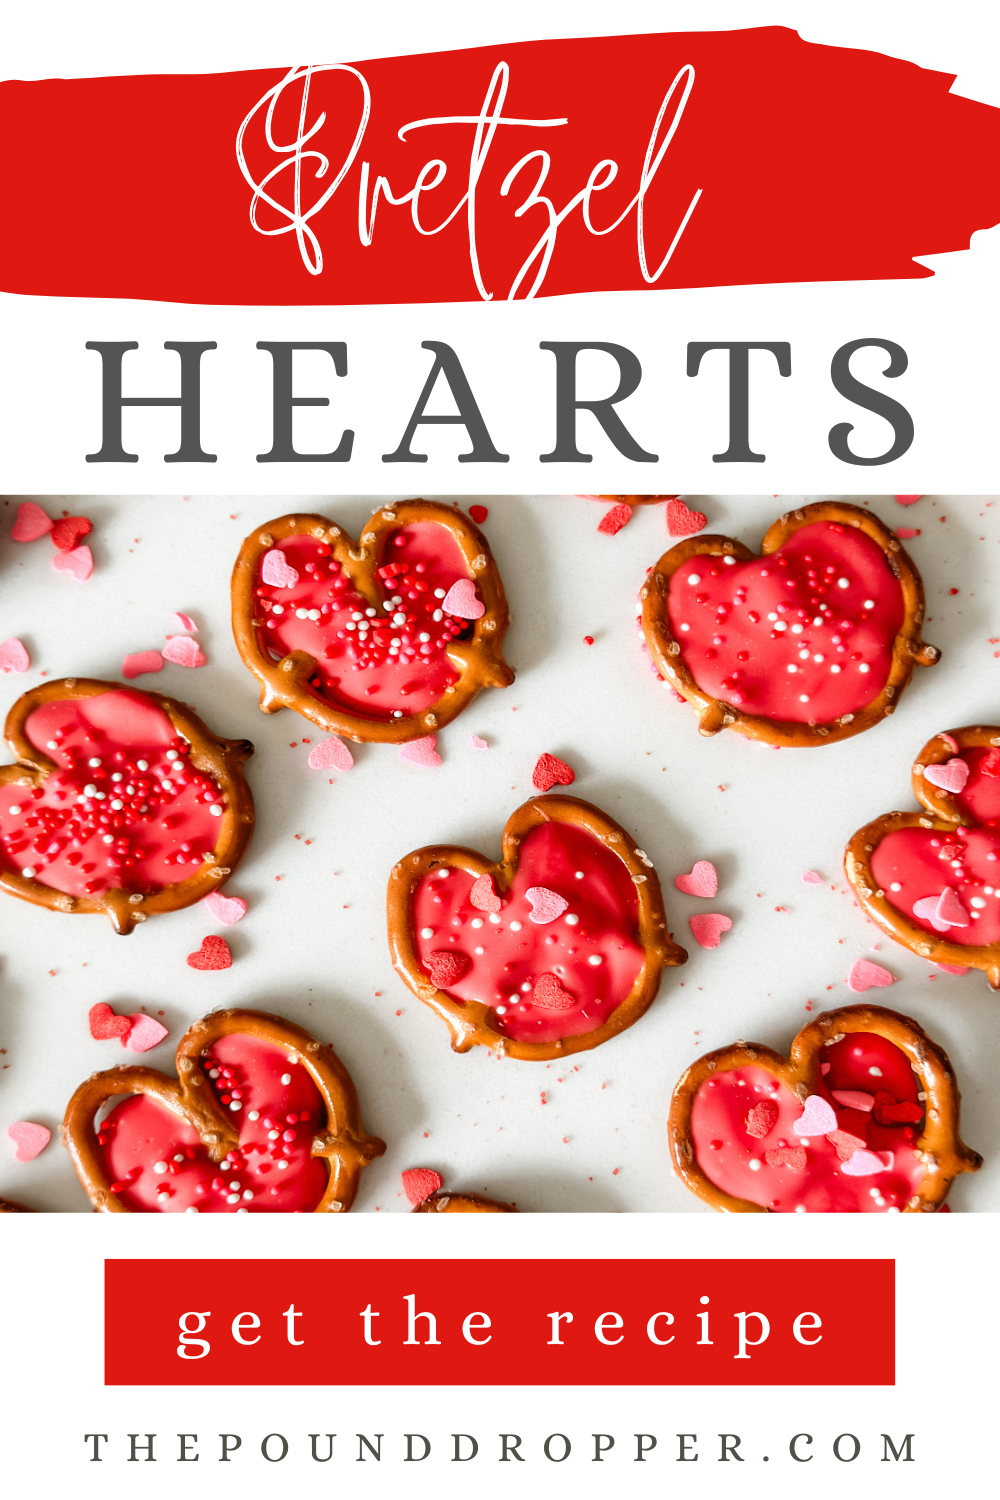 These Pretzel Hearts make for a quick and easy Valentines treat! They are made with just 3 ingredients- making for a fun, festive, bursting with LOVE snack or treat! via @pounddropper